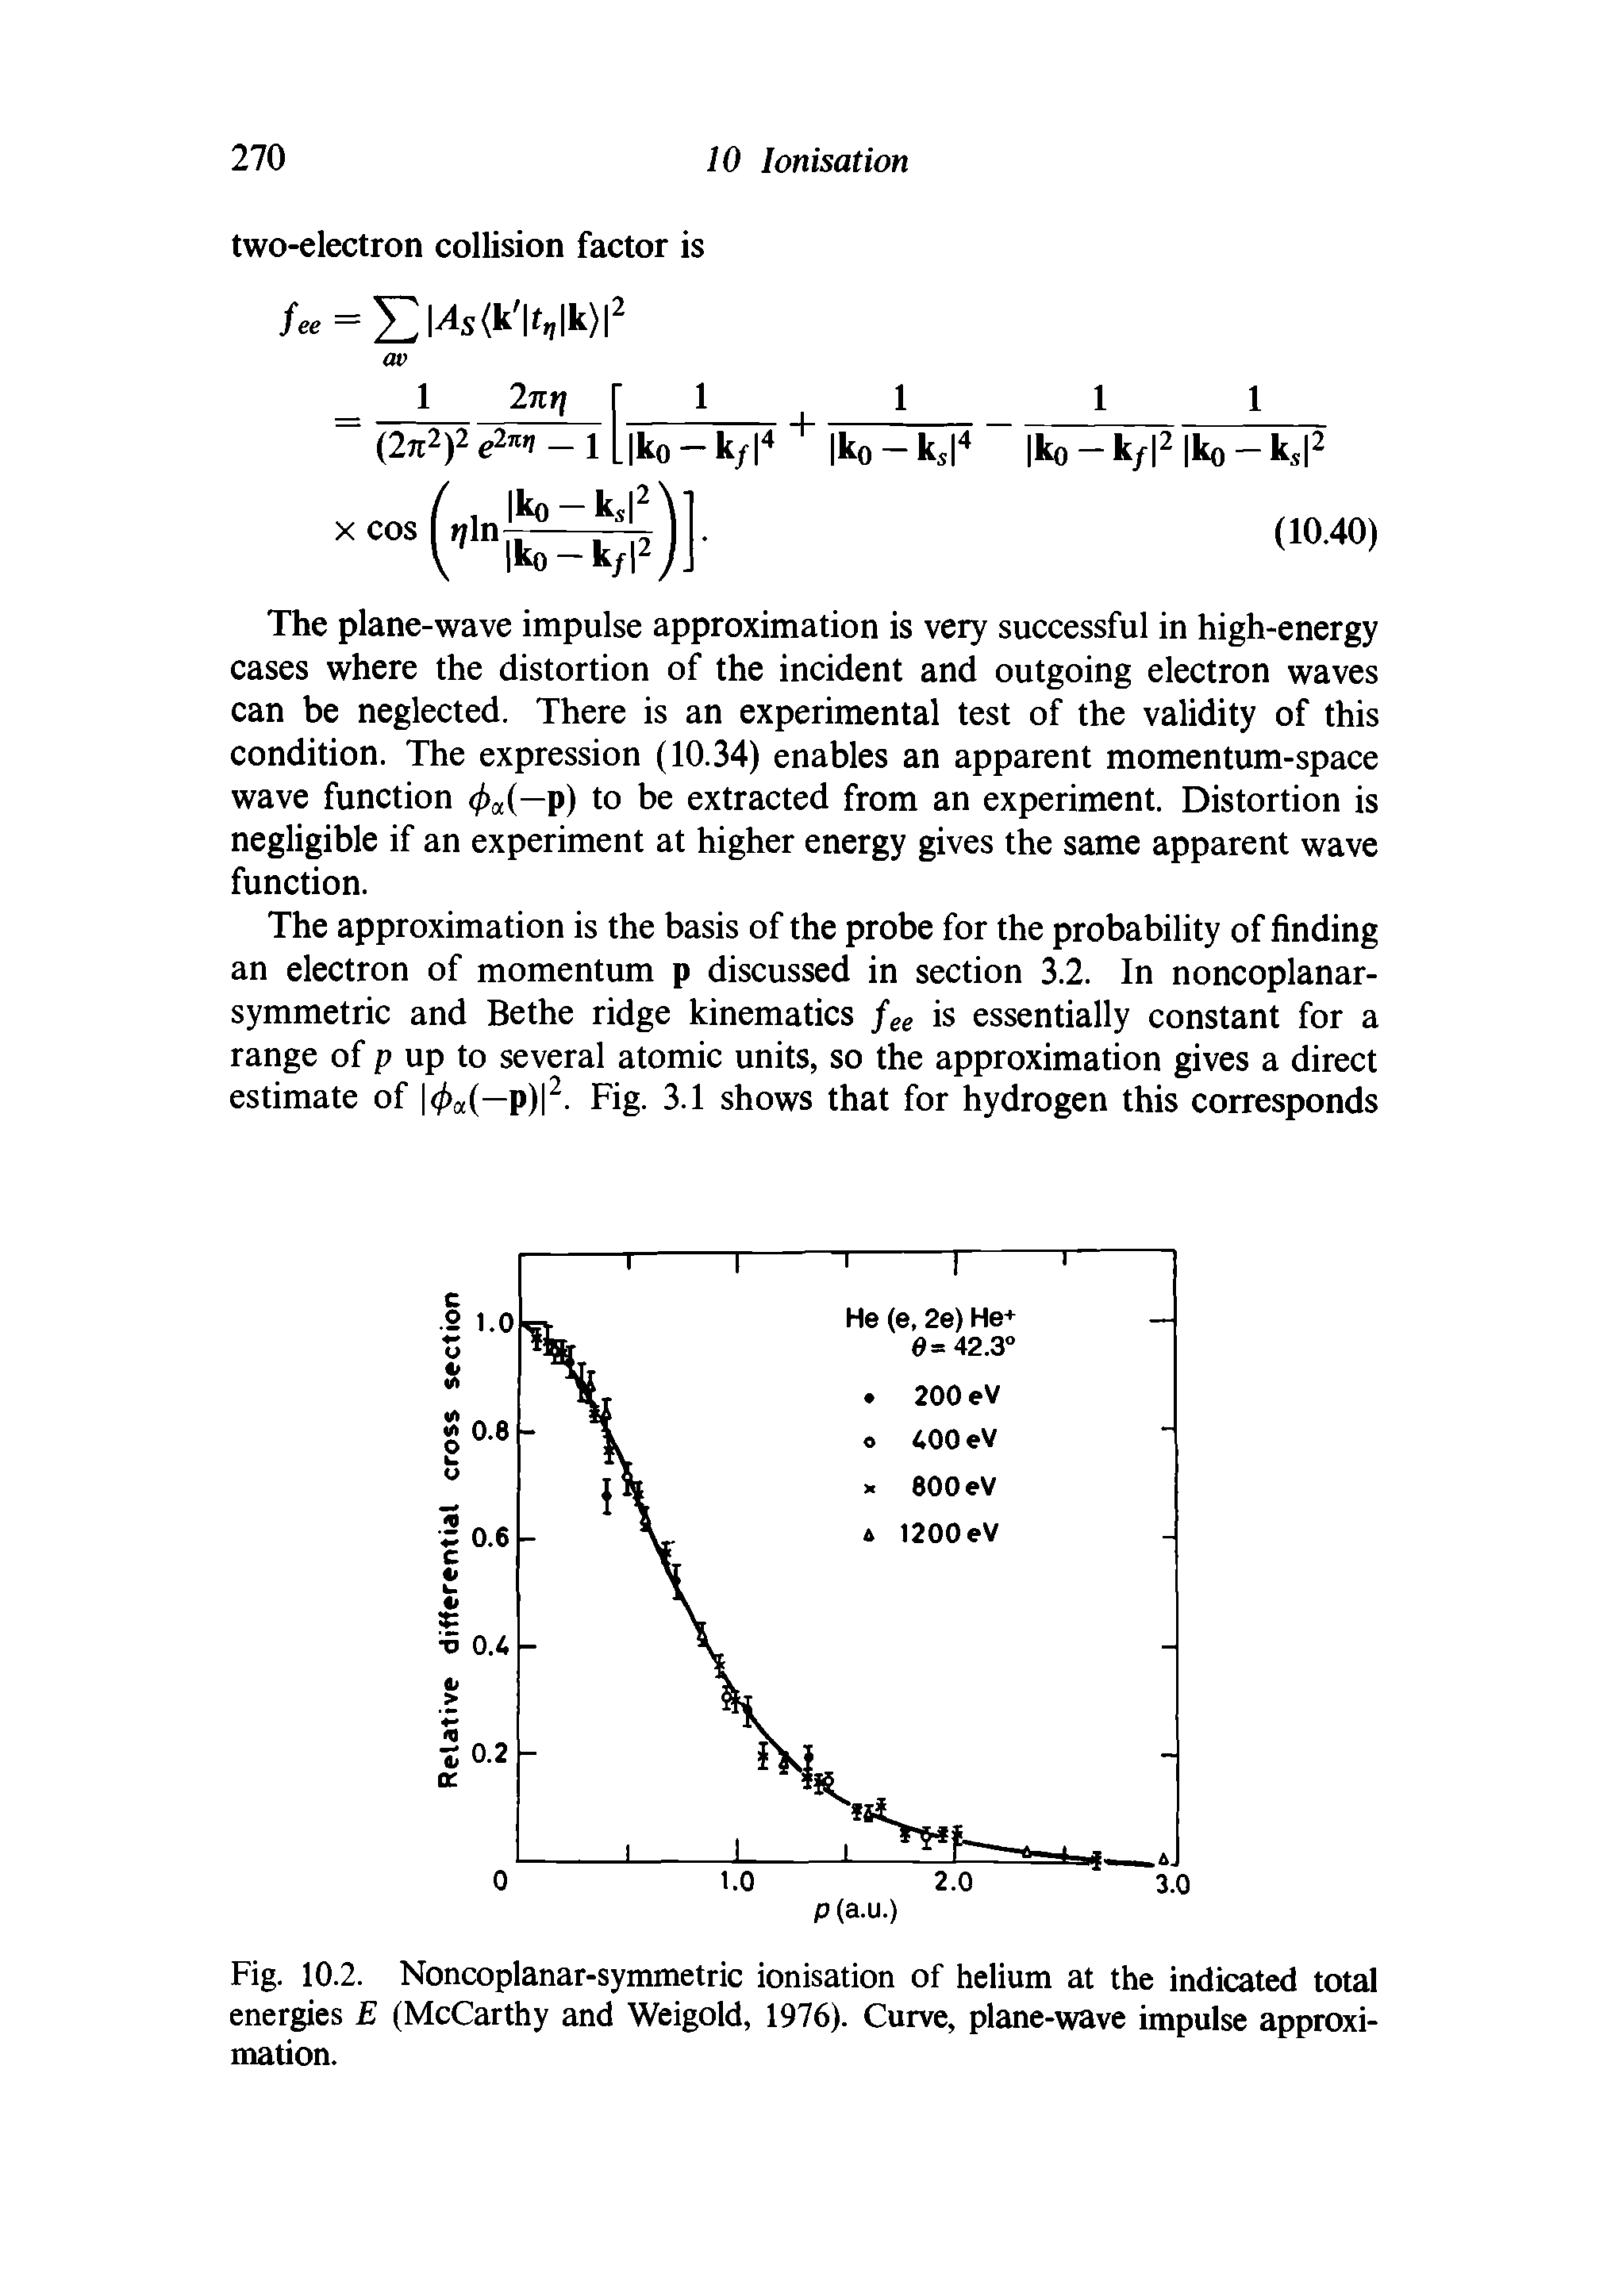 Fig. 10.2. Noncoplanar-symmetric ionisation of helium at the indicated total energies E (McCarthy and Weigold, 1976). Curve, plane-wave impulse approximation.